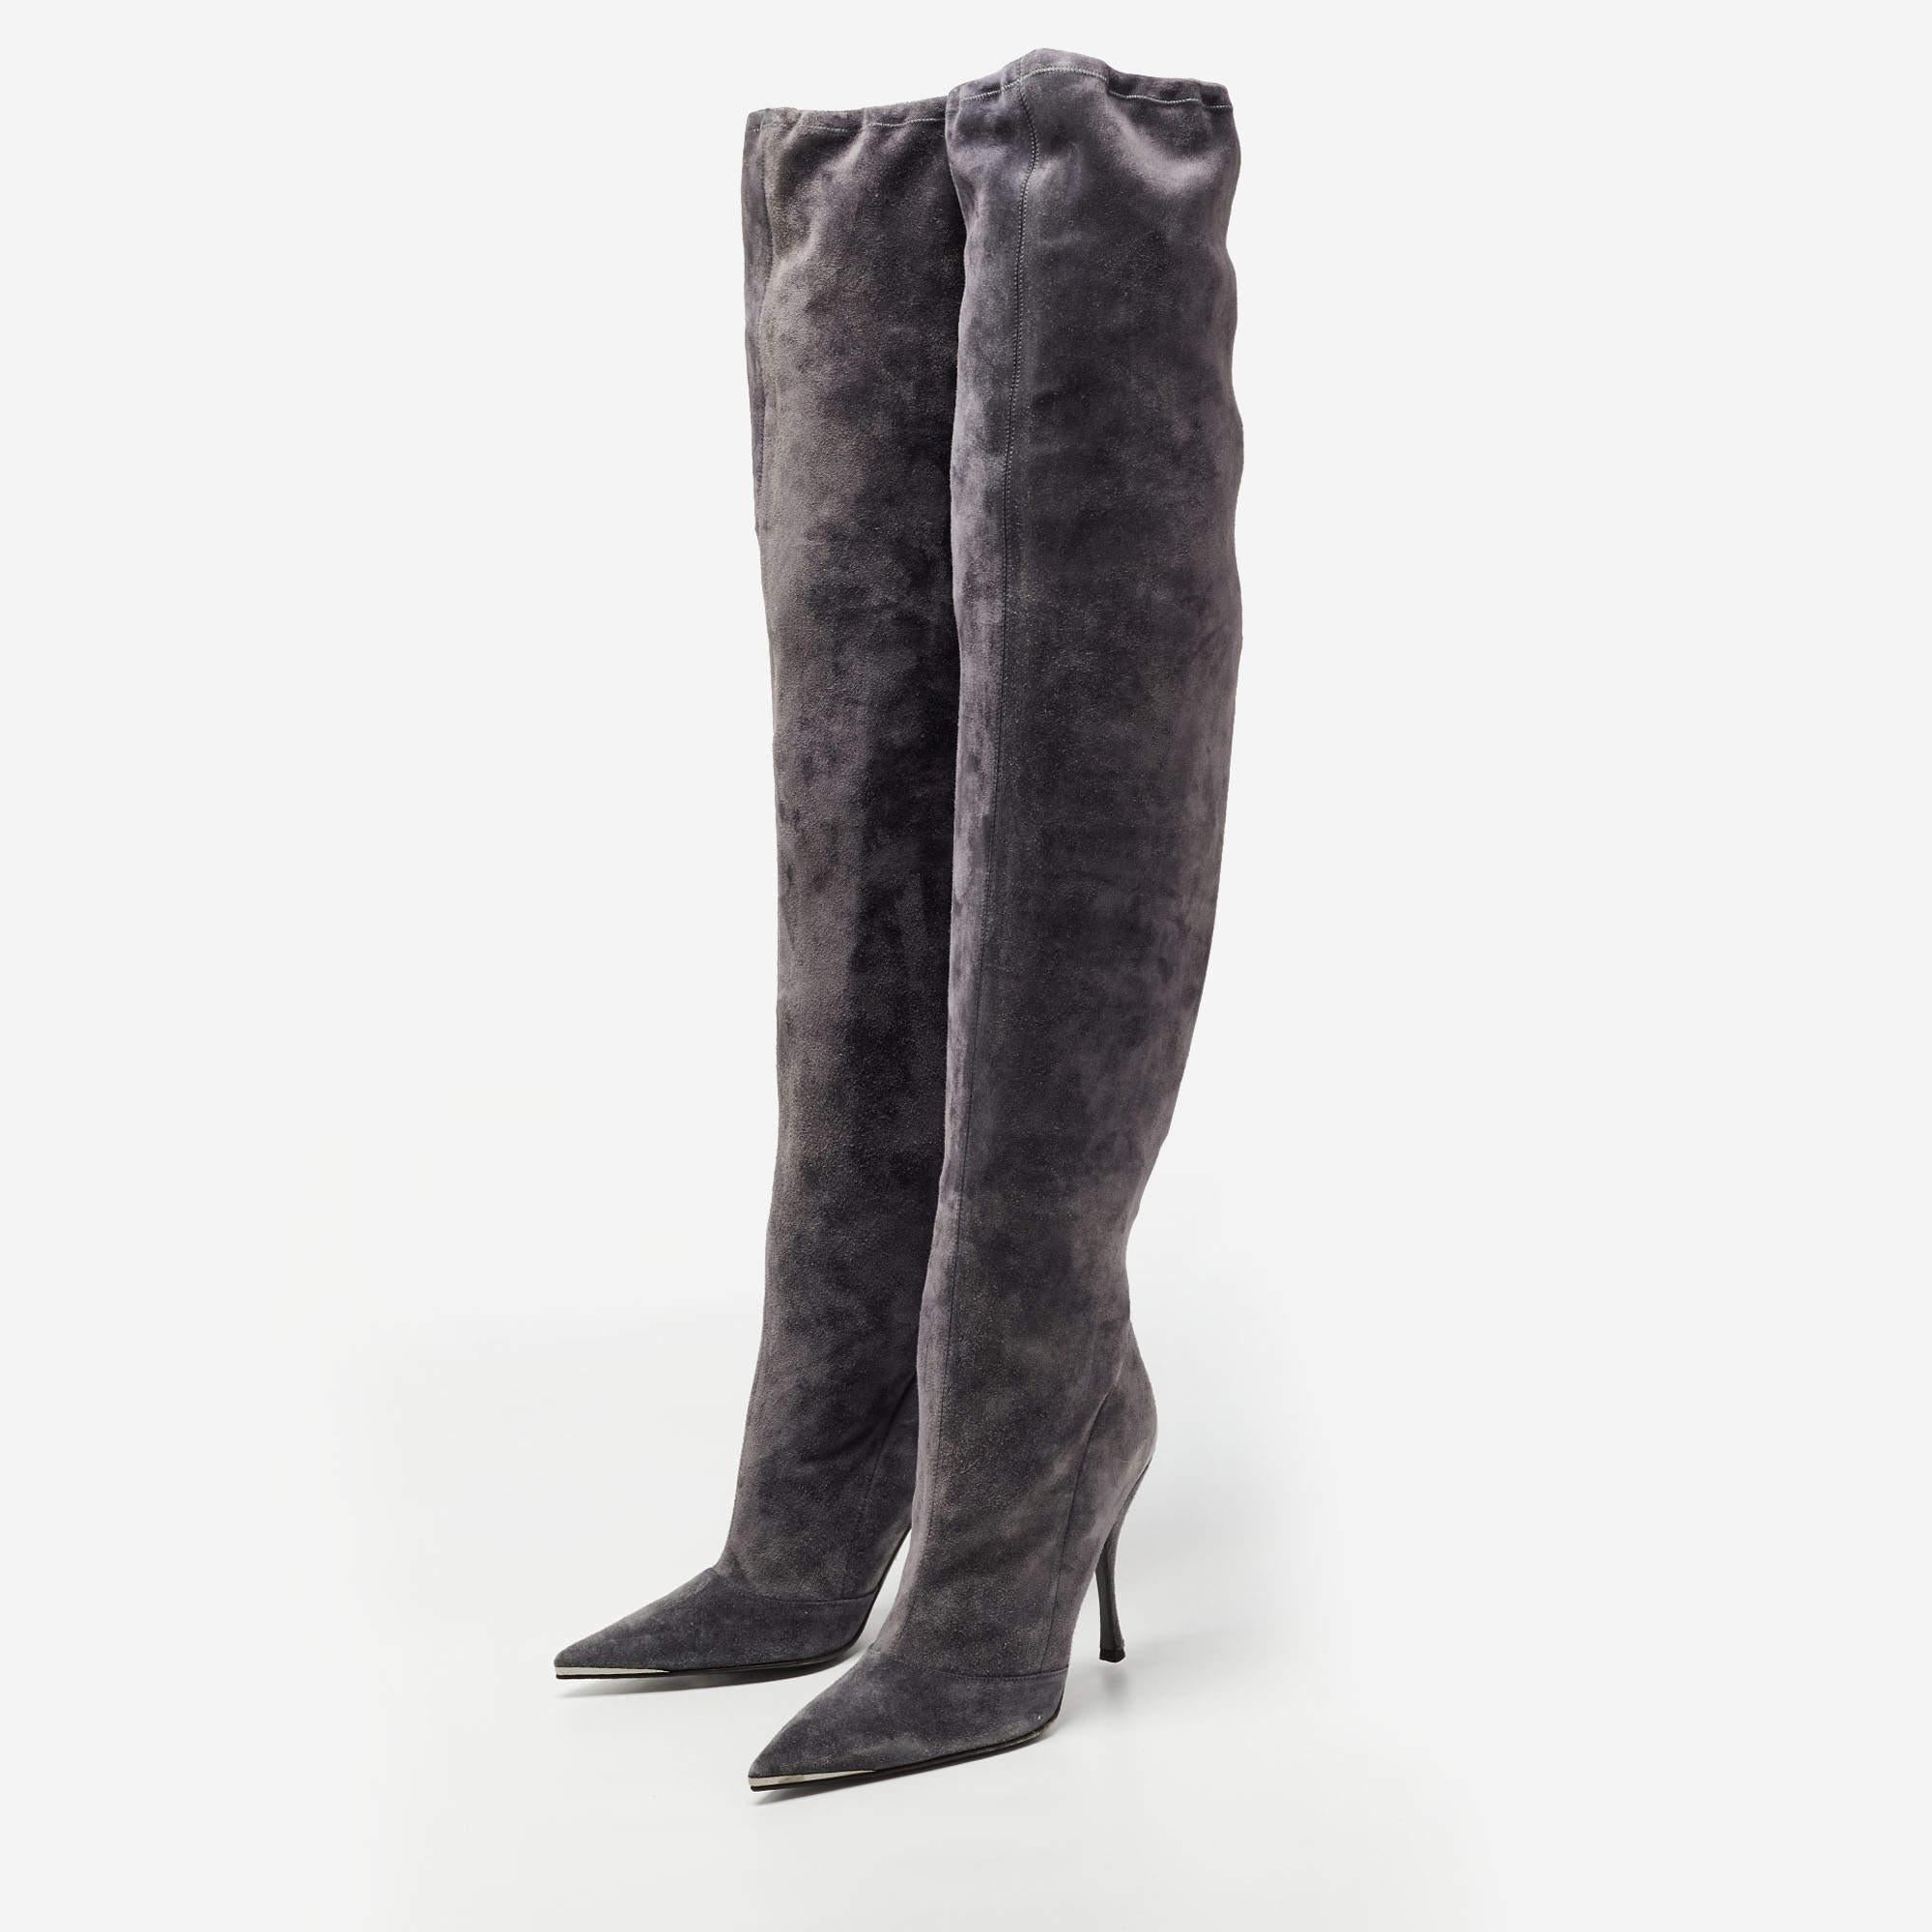 Dolce & Gabbana Grey Suede Knee Length Boots Size 41 1